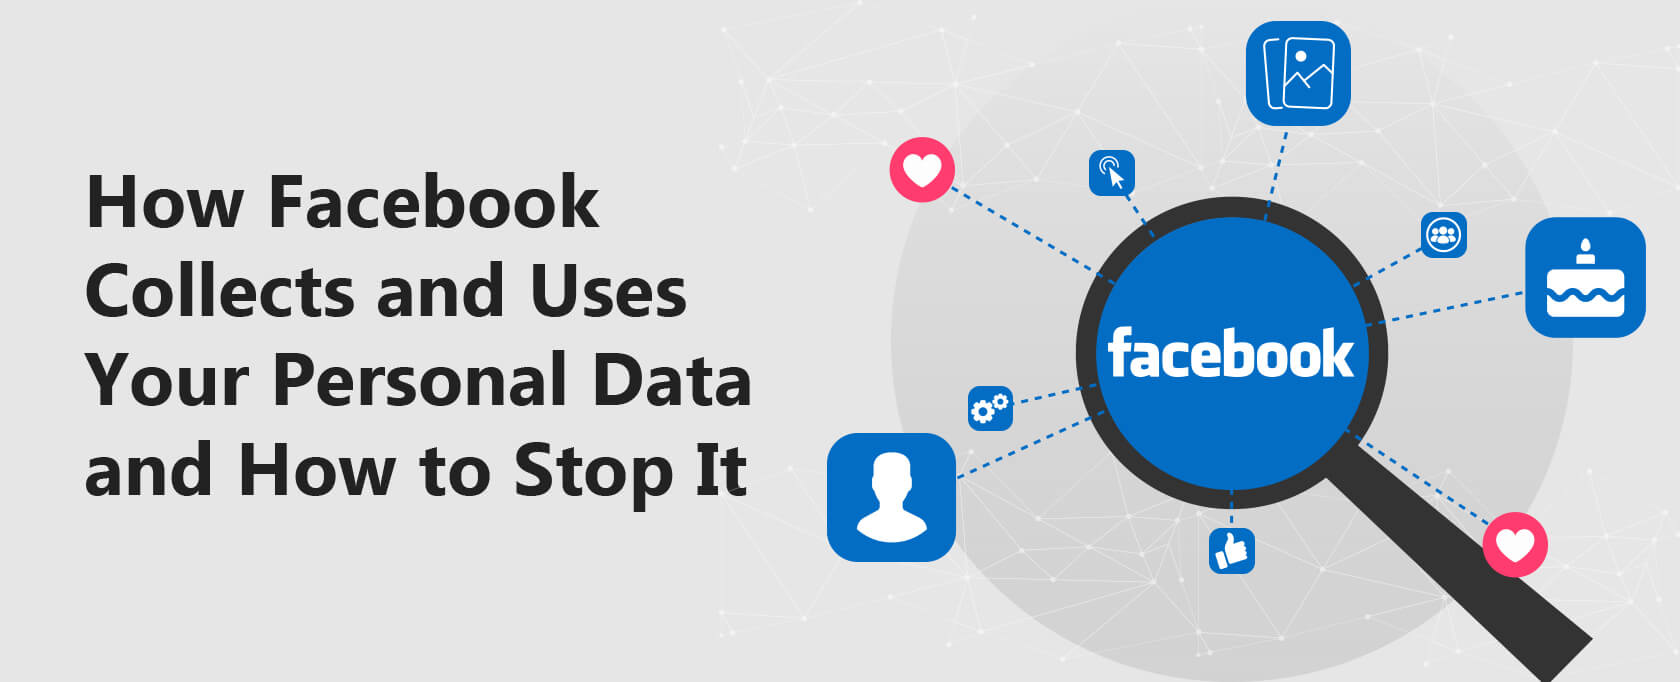 How Facebook Collects and Uses Your Personal Data and How to Stop It